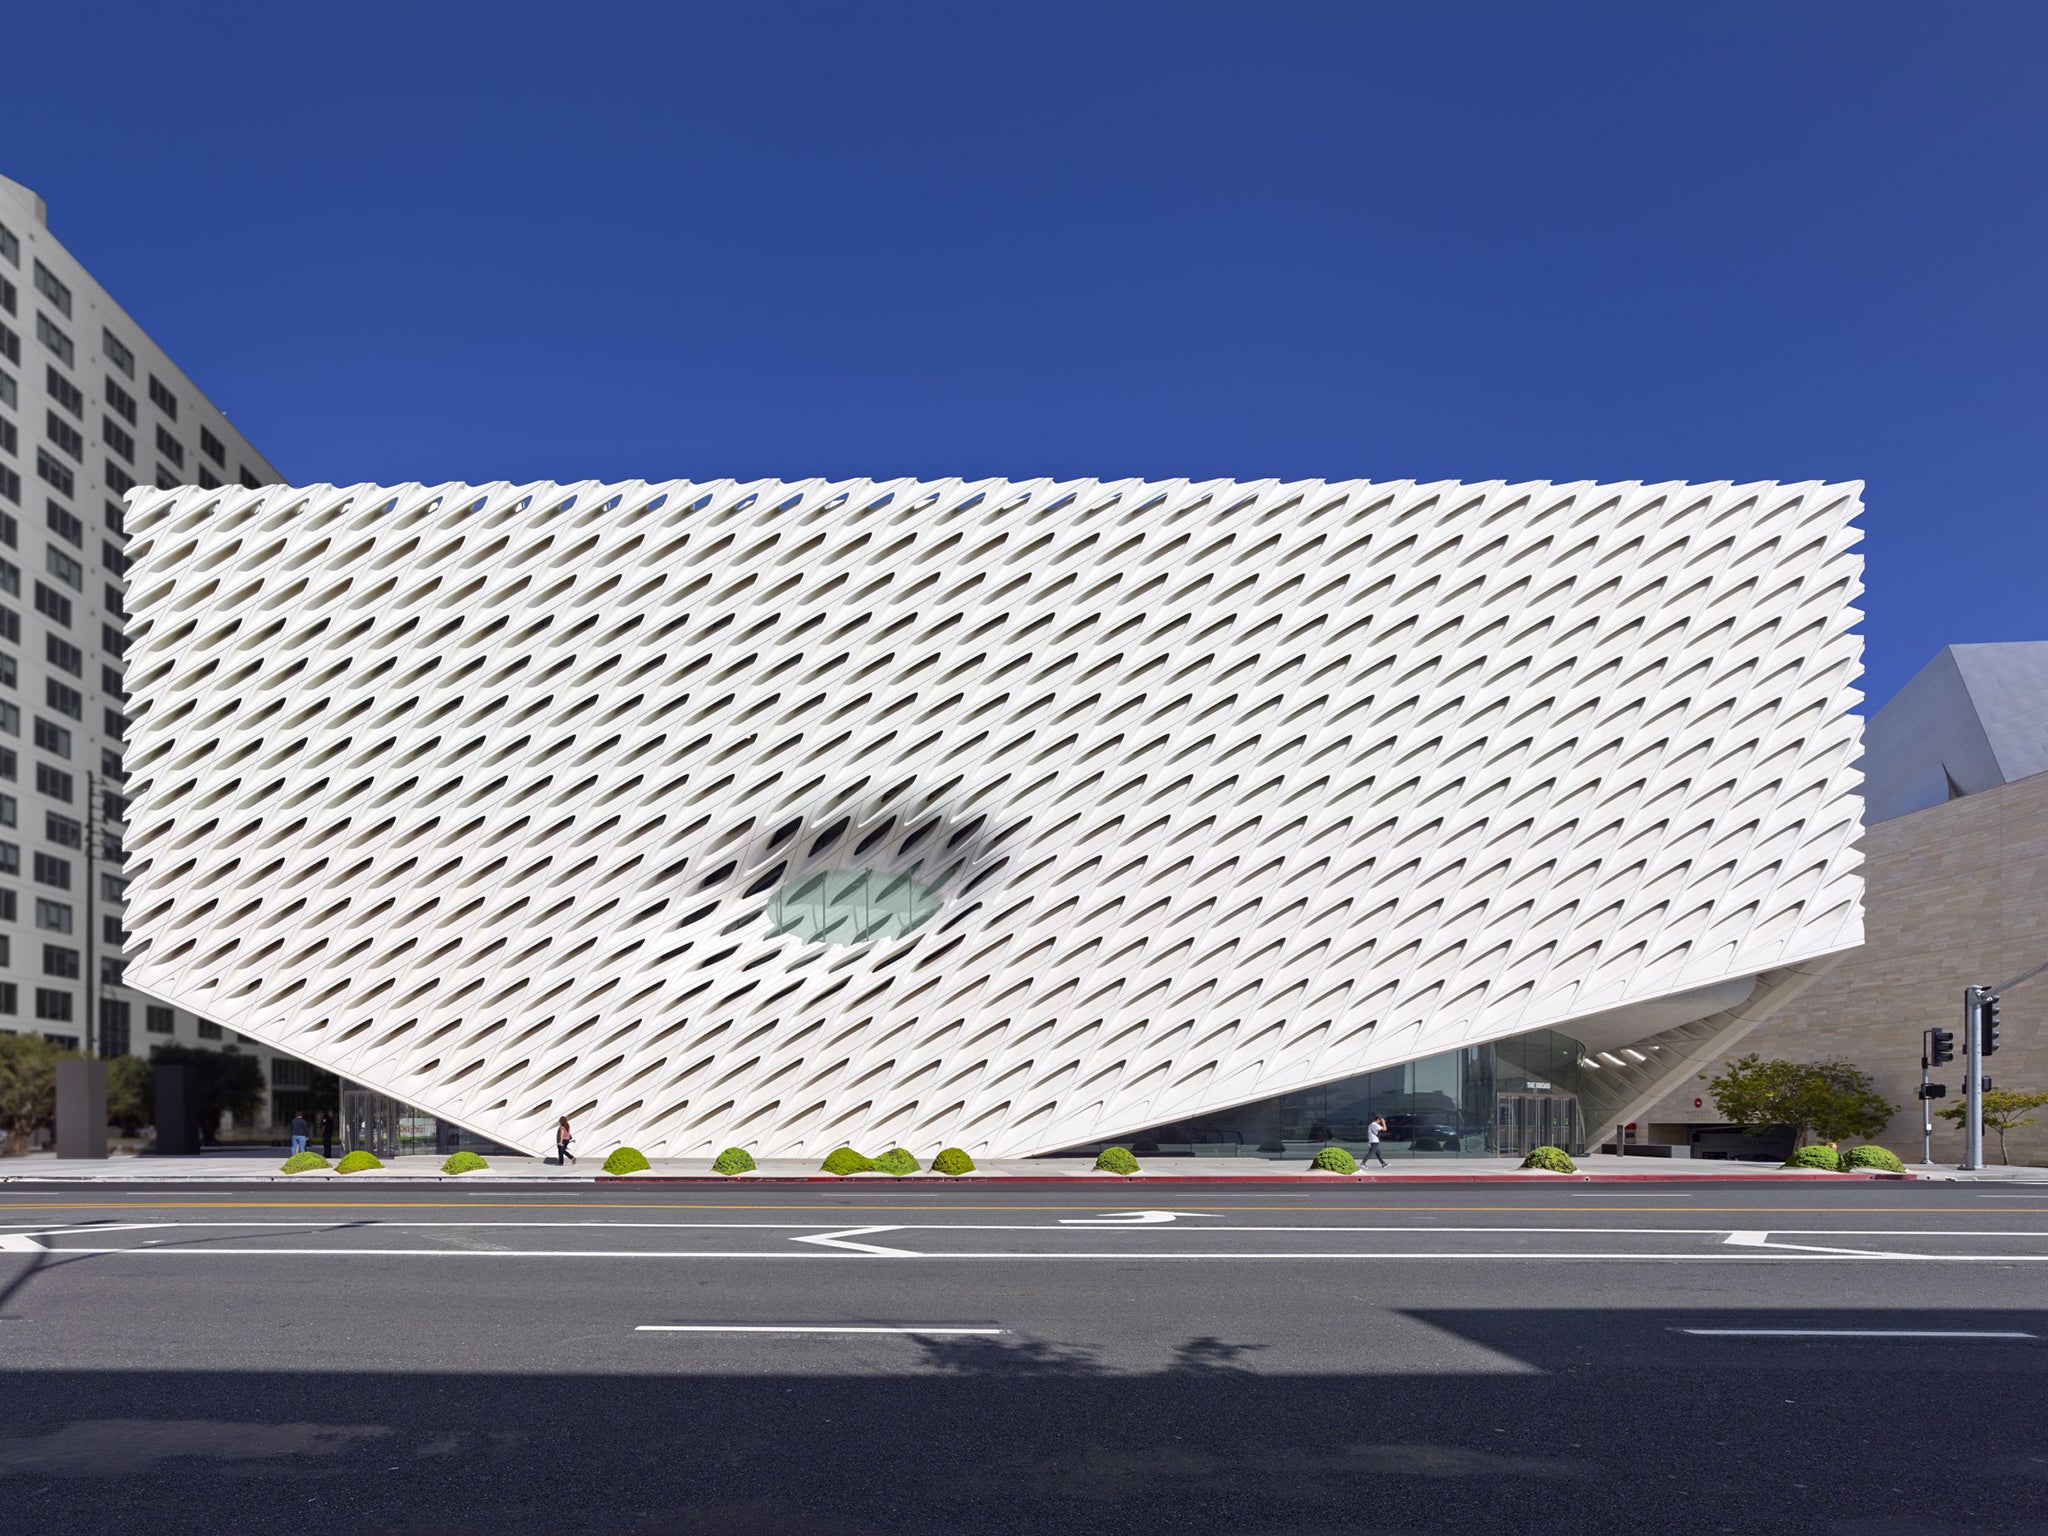 The Broad’s outer shell resembles a stretched and distorted waffle; visitors can see into the huge storage vault